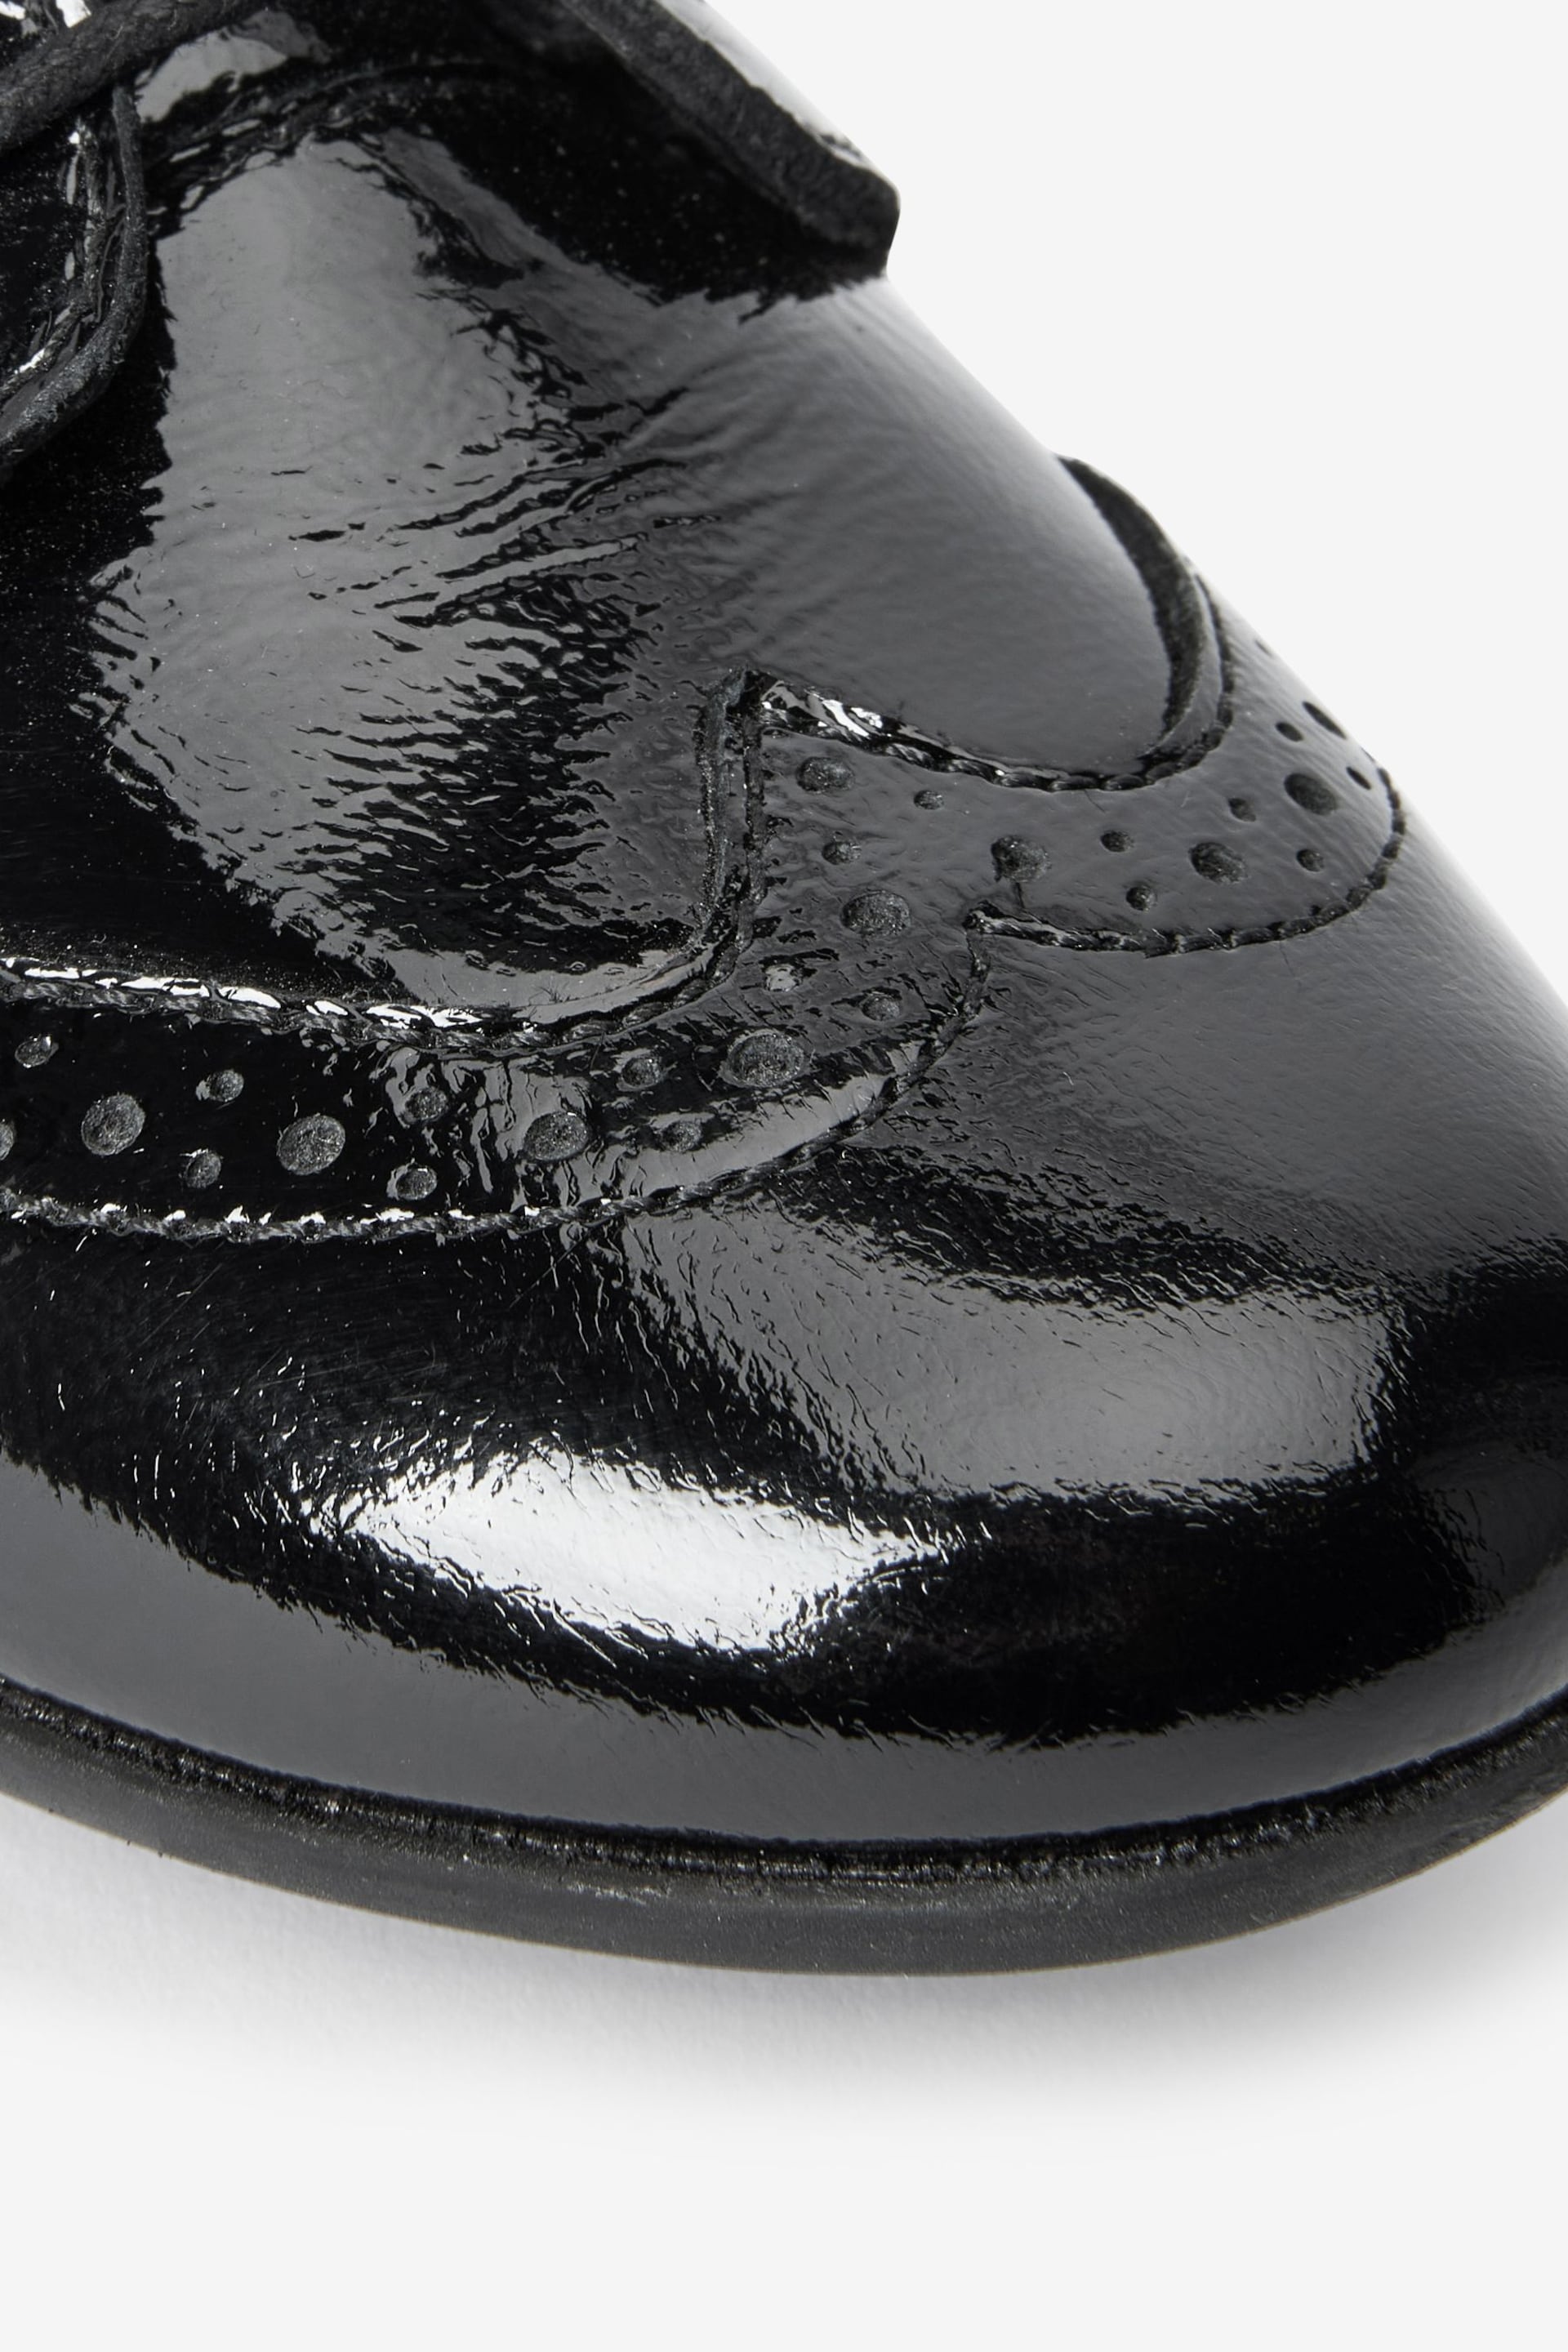 Black Patent Standard Fit (F) School Leather Lace-Up Brogues - Image 10 of 10